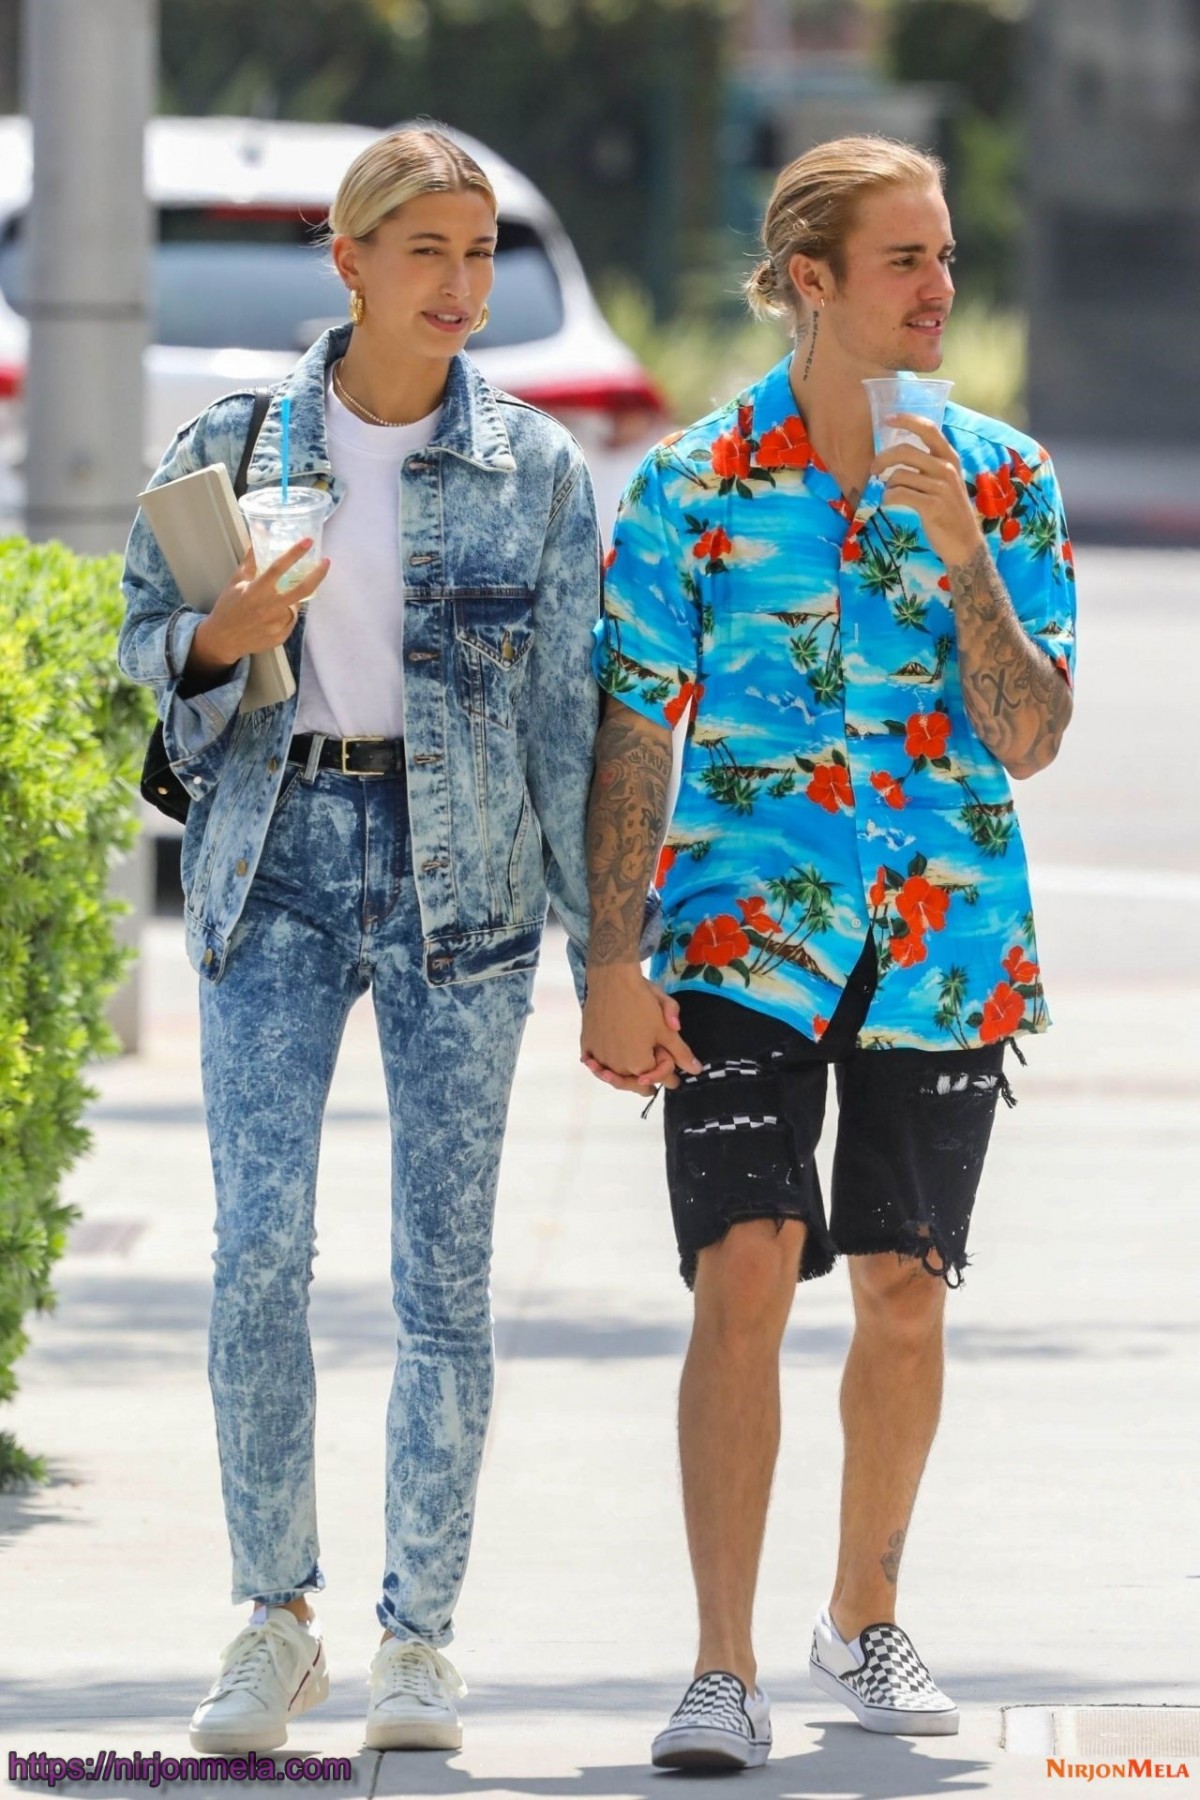 hailey-baldwin-and-justin-bieber-out-in-west-hollywood-08-26-2018-0.jpg